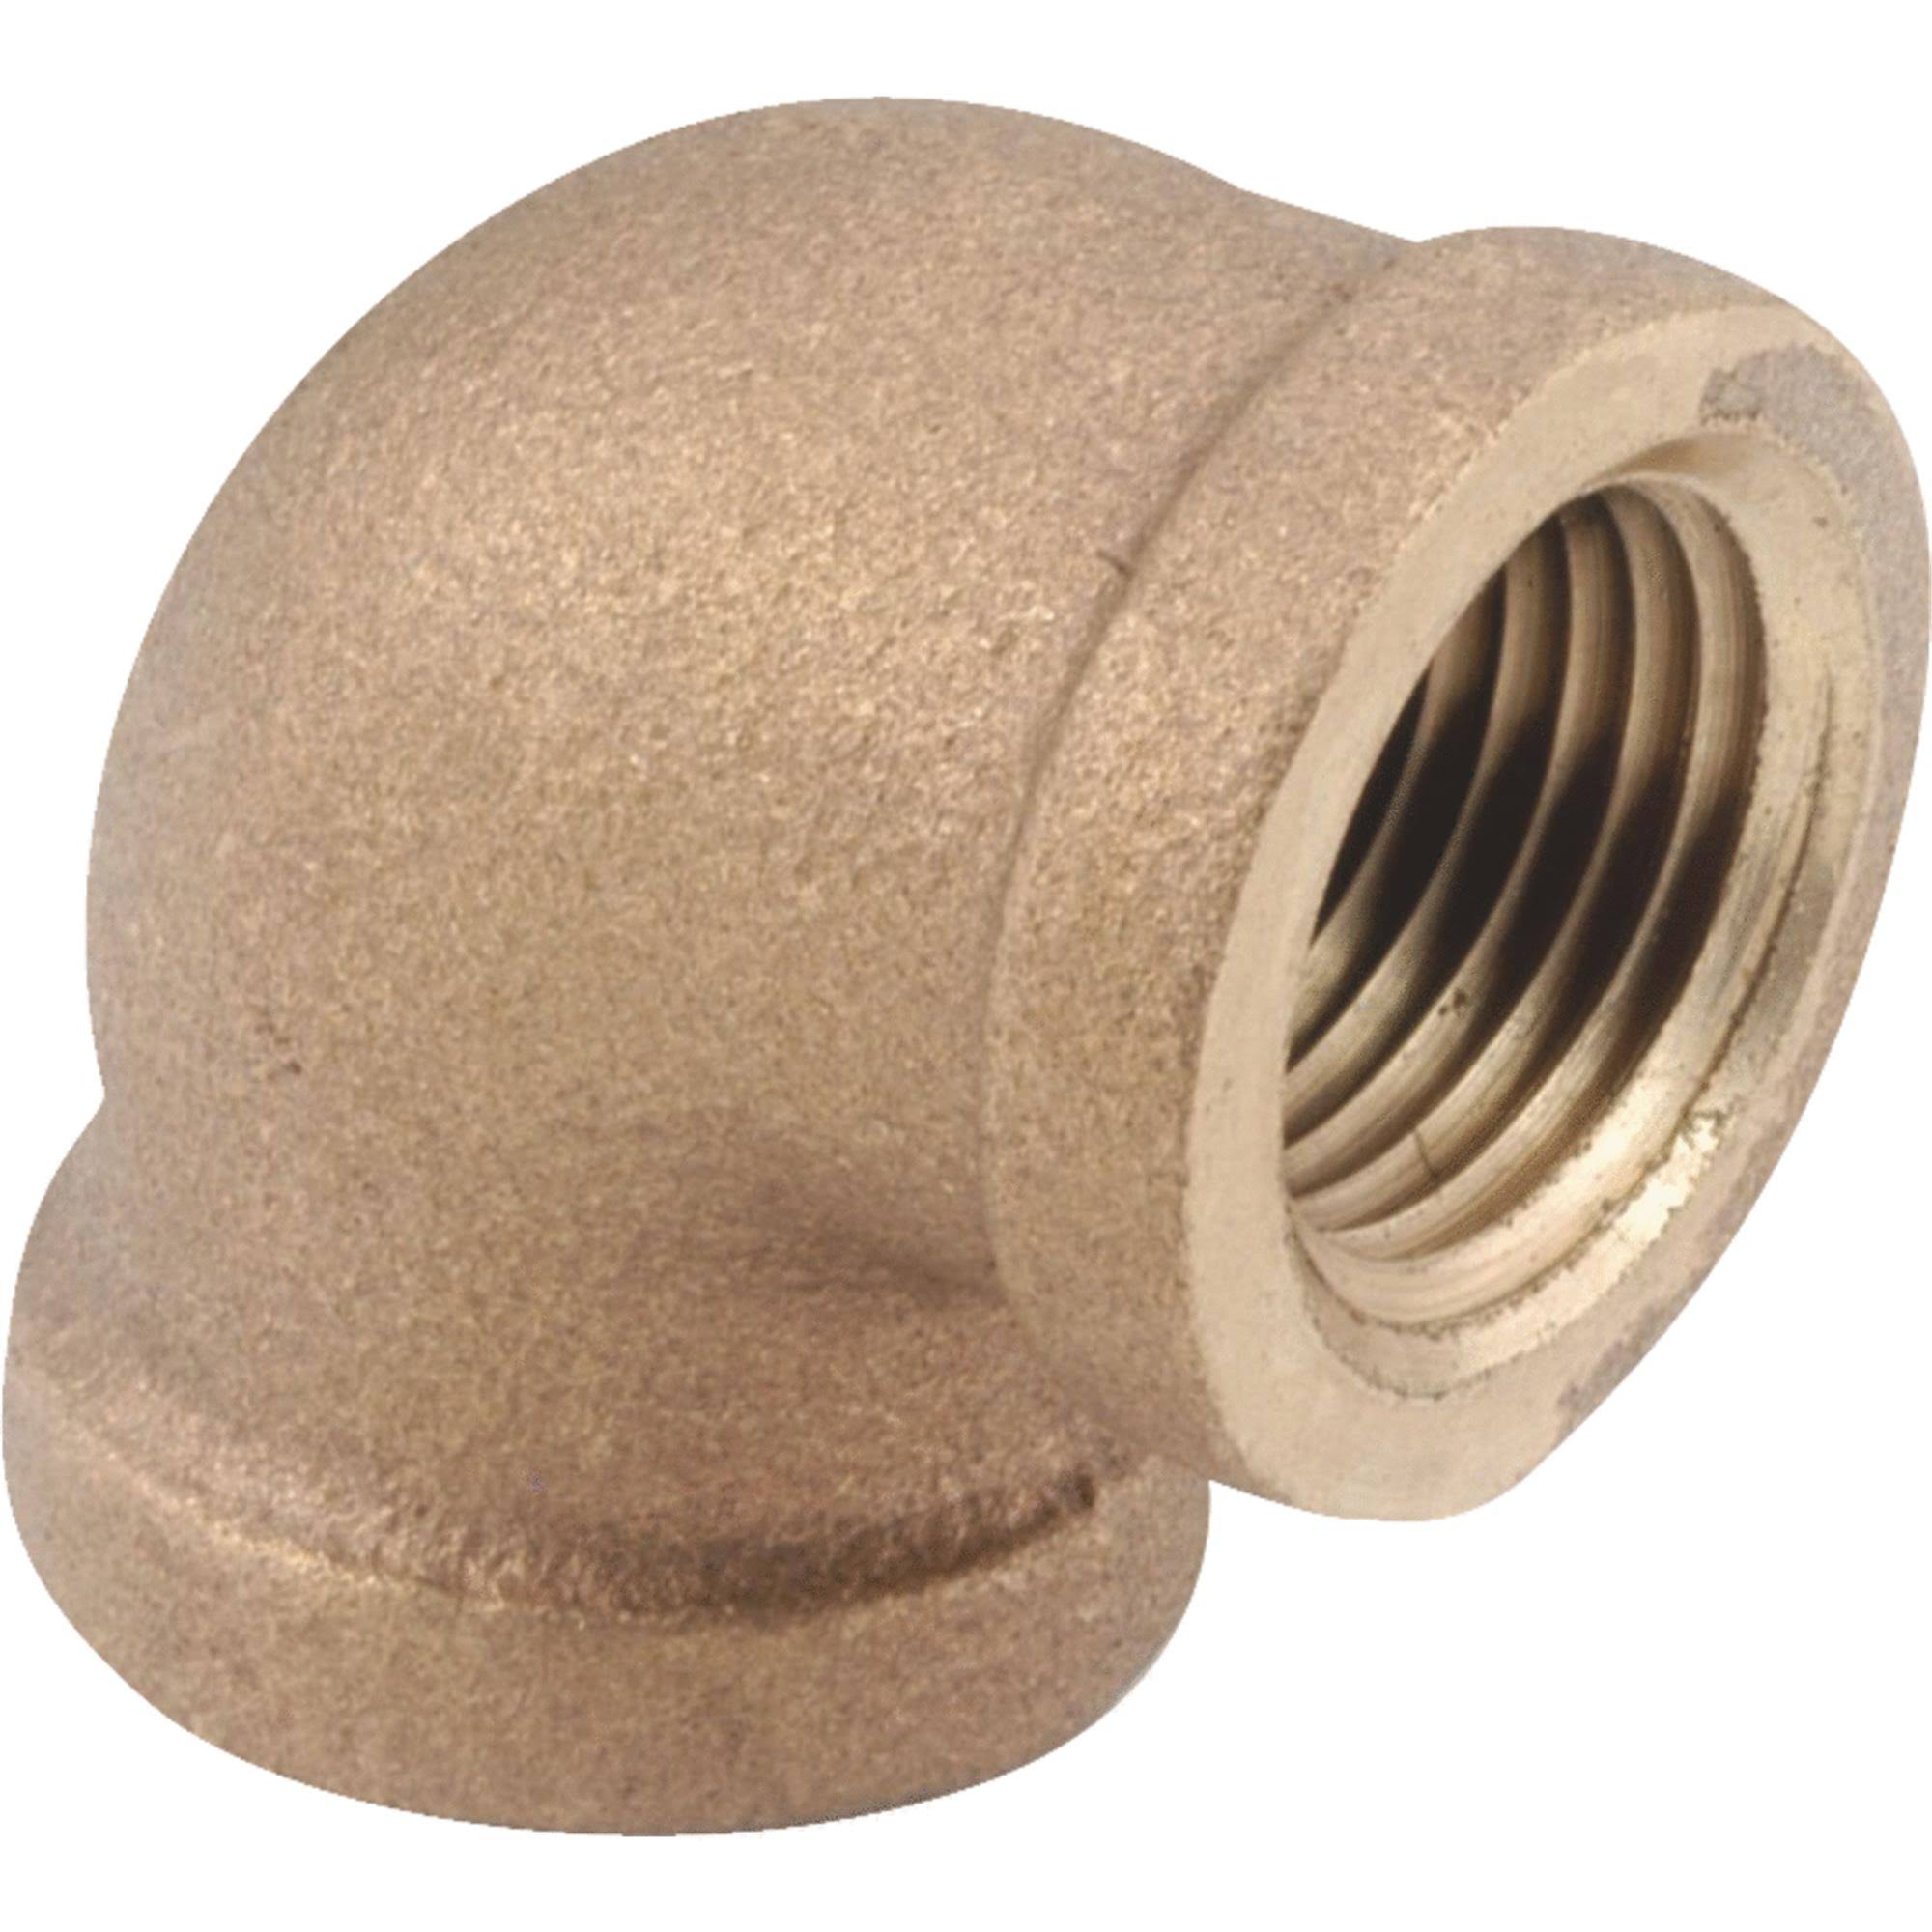 Anderson Metals 738100-08 Low Lead 90-Degree Angle Elbow - Brass,1/2"